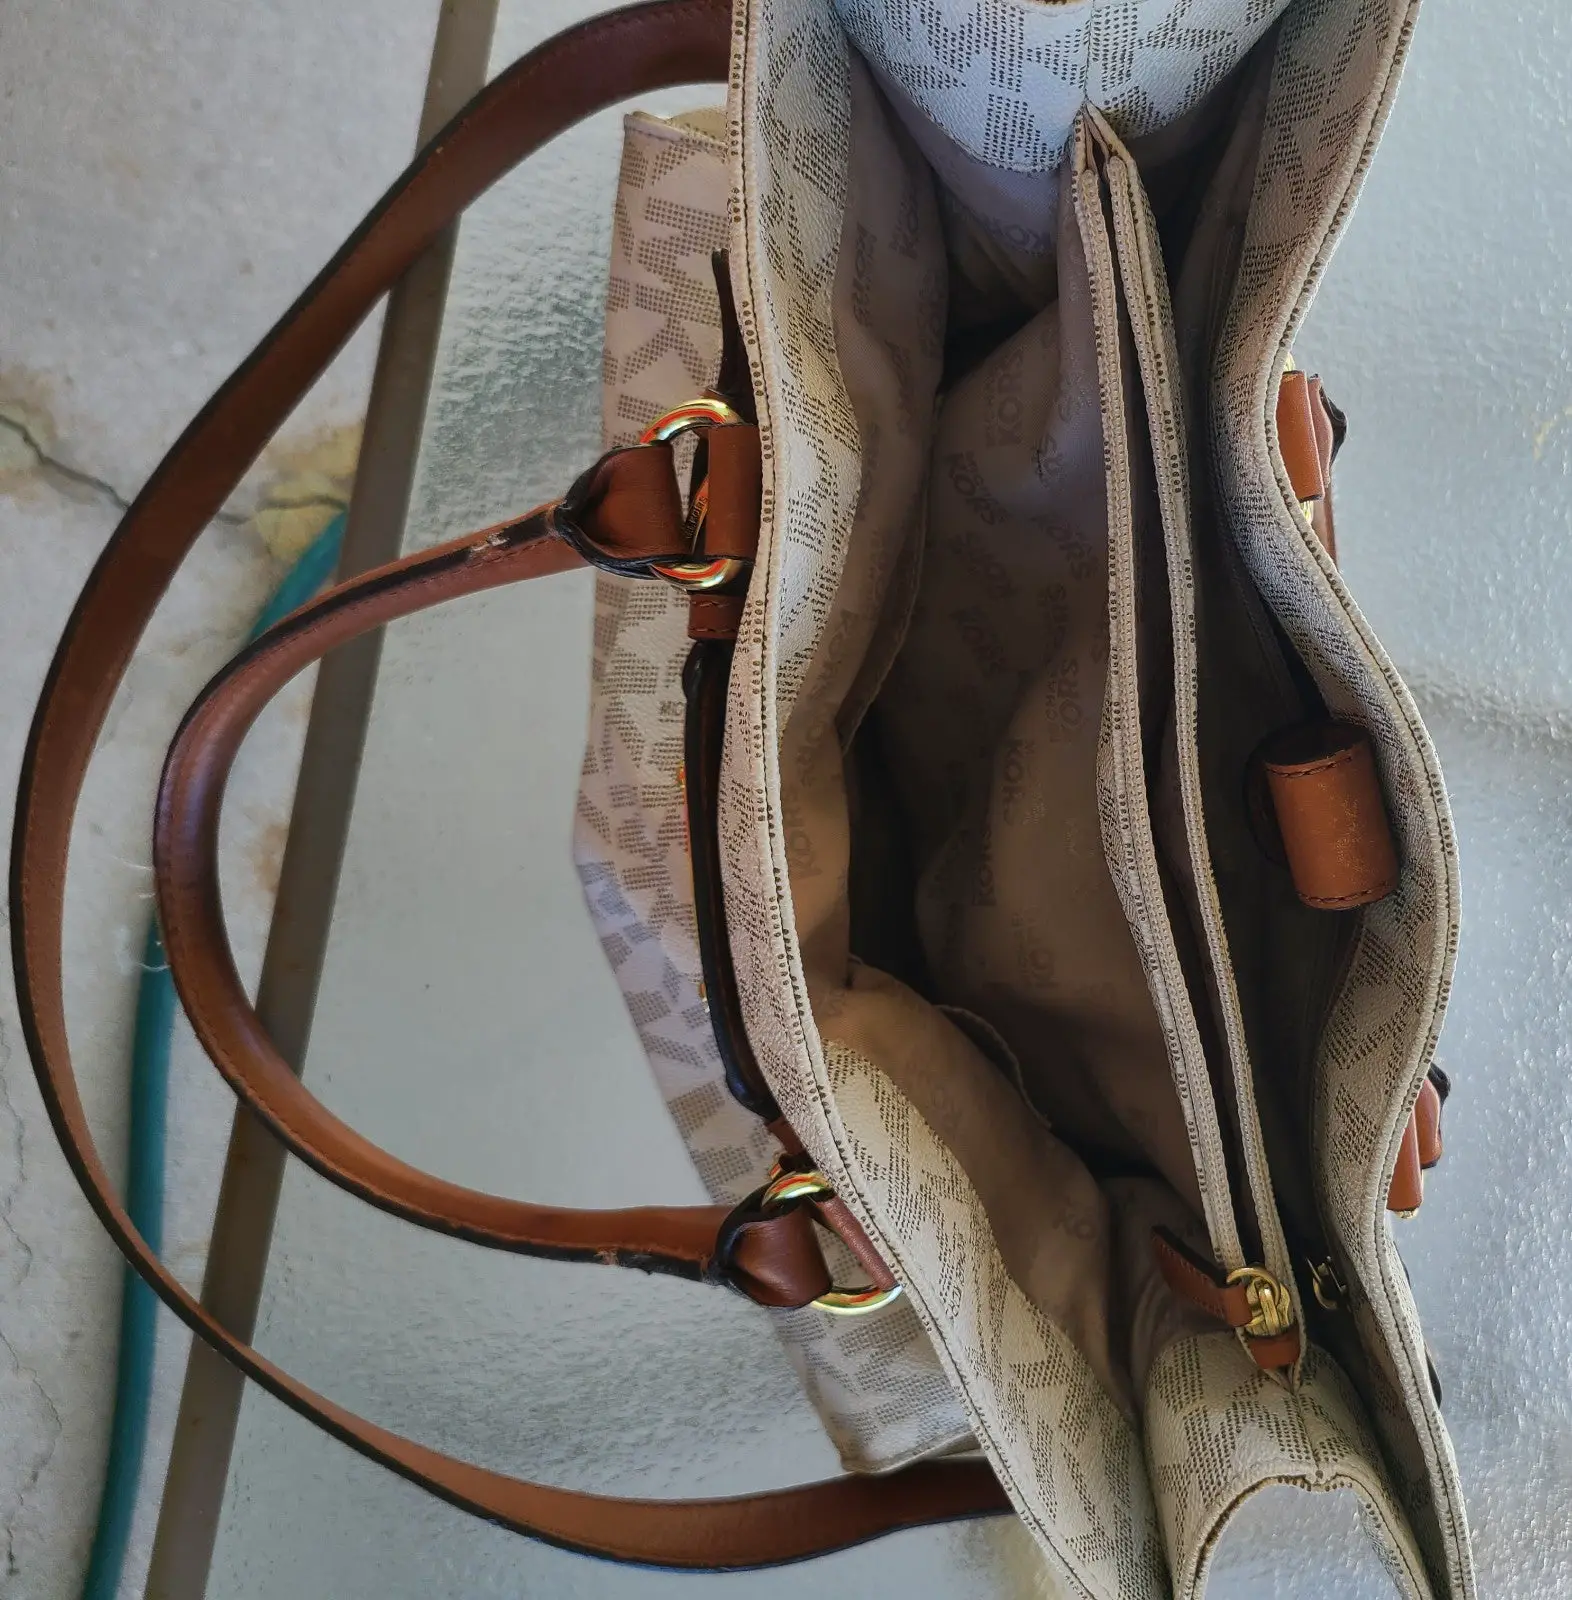 Inspect the Purse for Stains or Grime